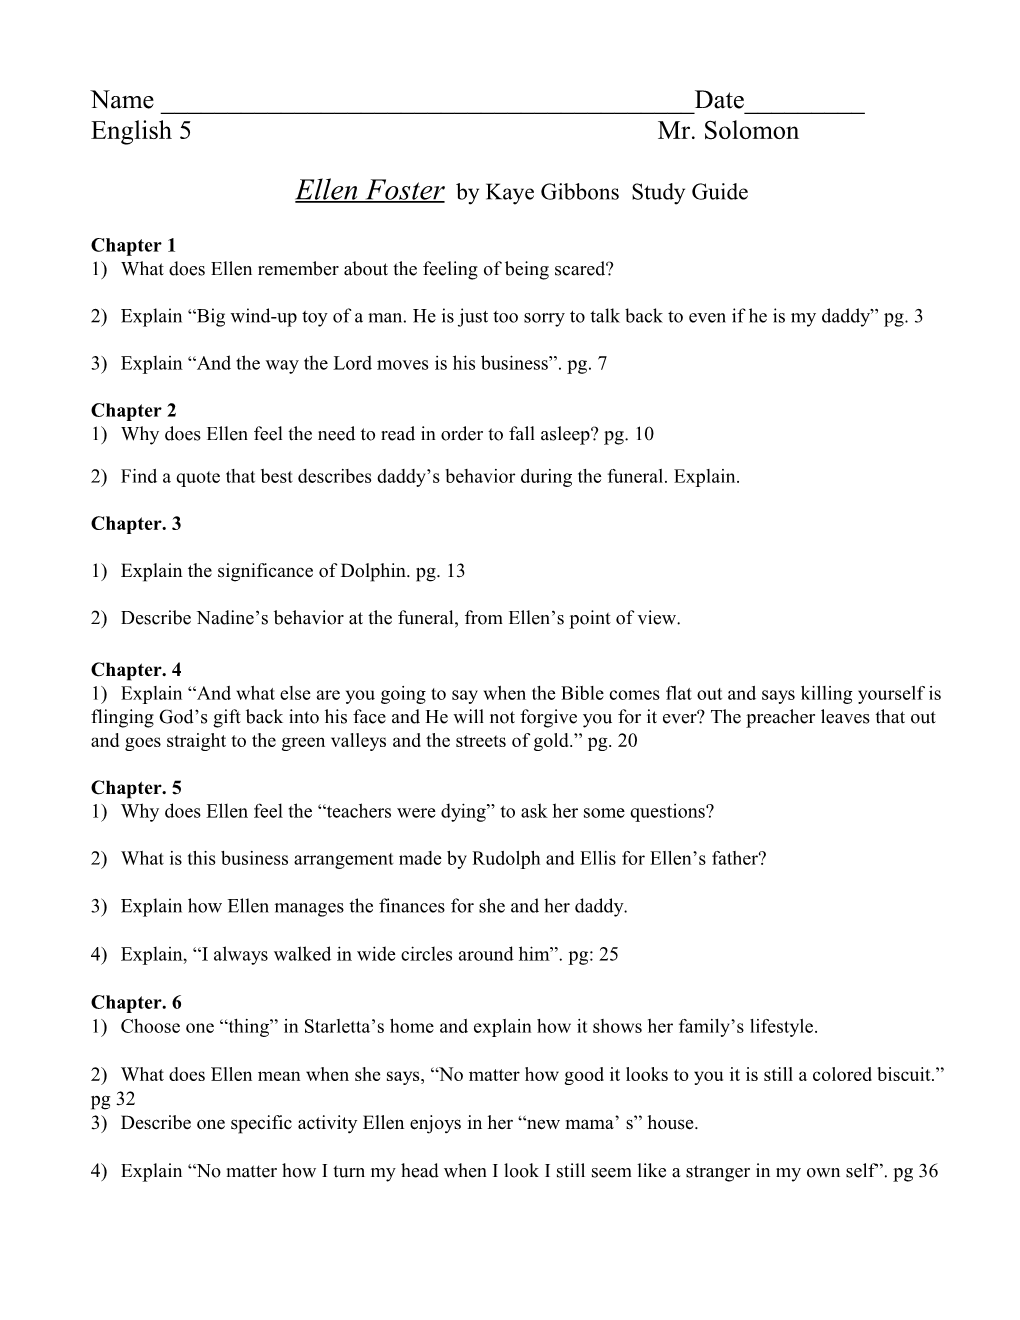 Ellen Foster by Kaye Gibbons Study Guide